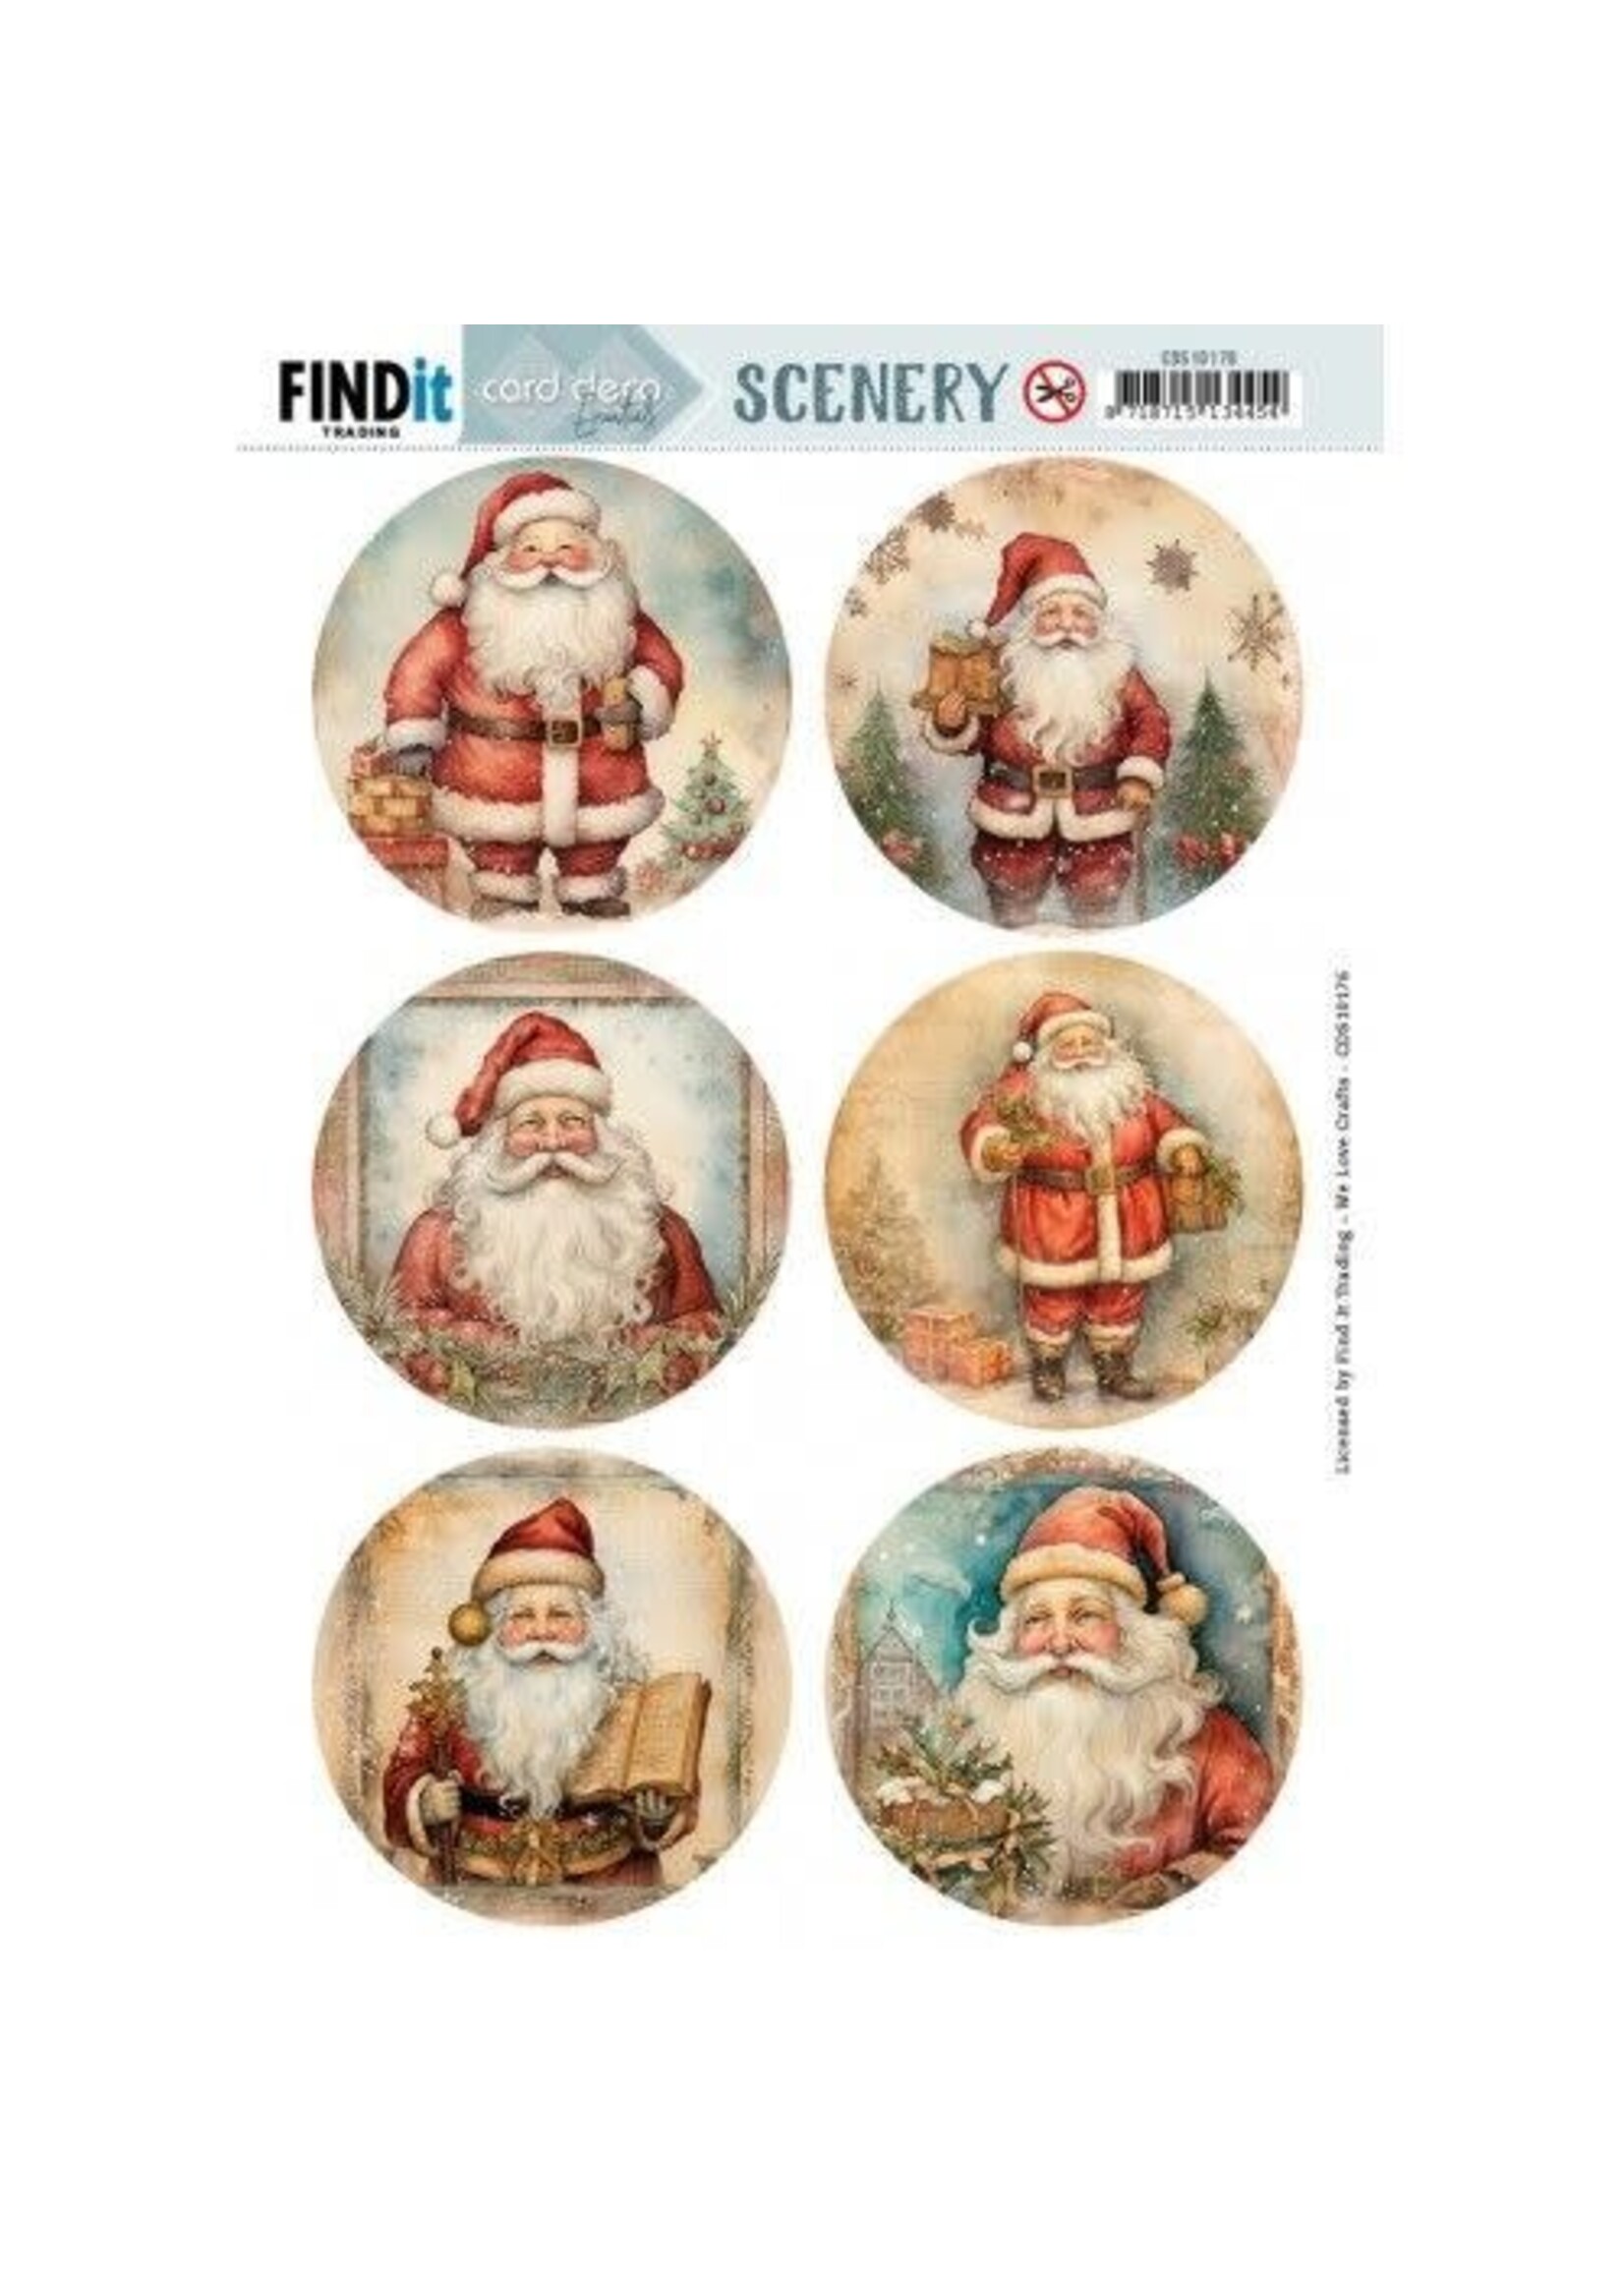 CDS10176 Push Out Scenery - Card Deco Essentials - Santa Round